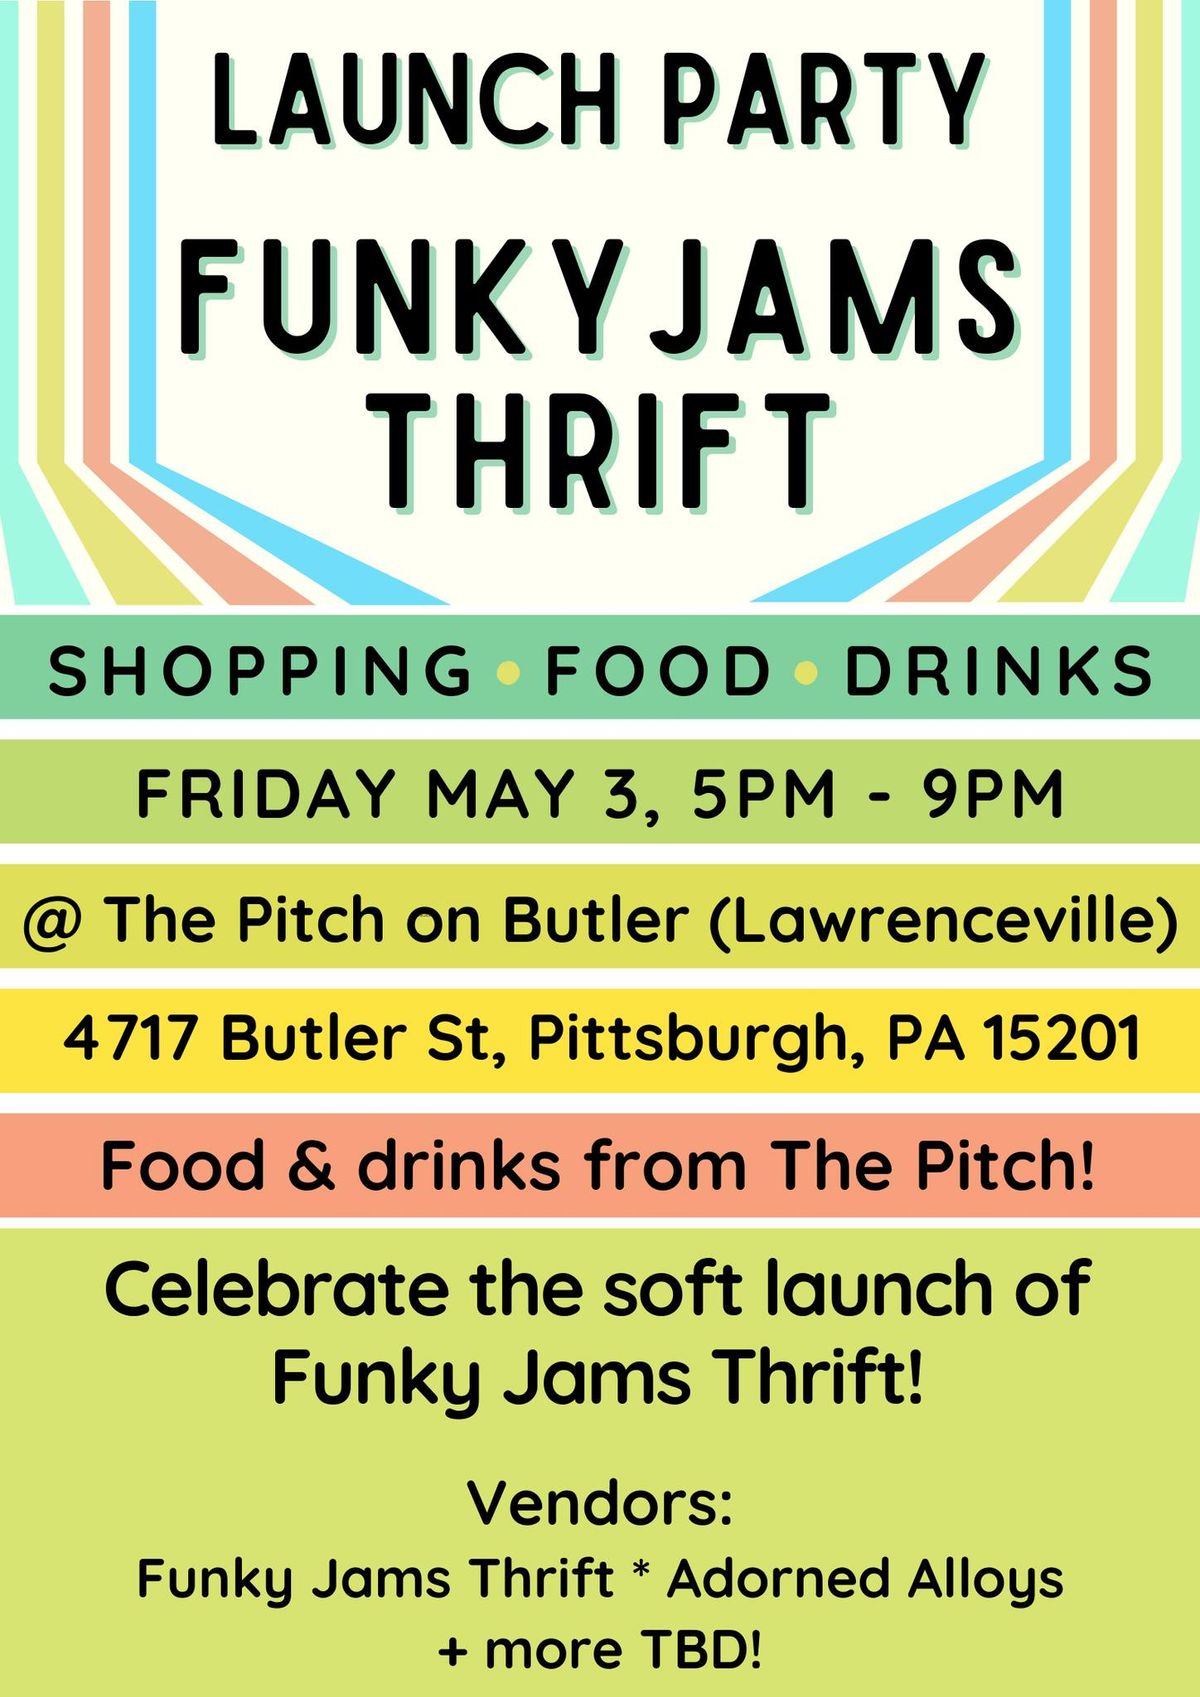 Launch Party - Funky Jams Thrift at The Pitch 